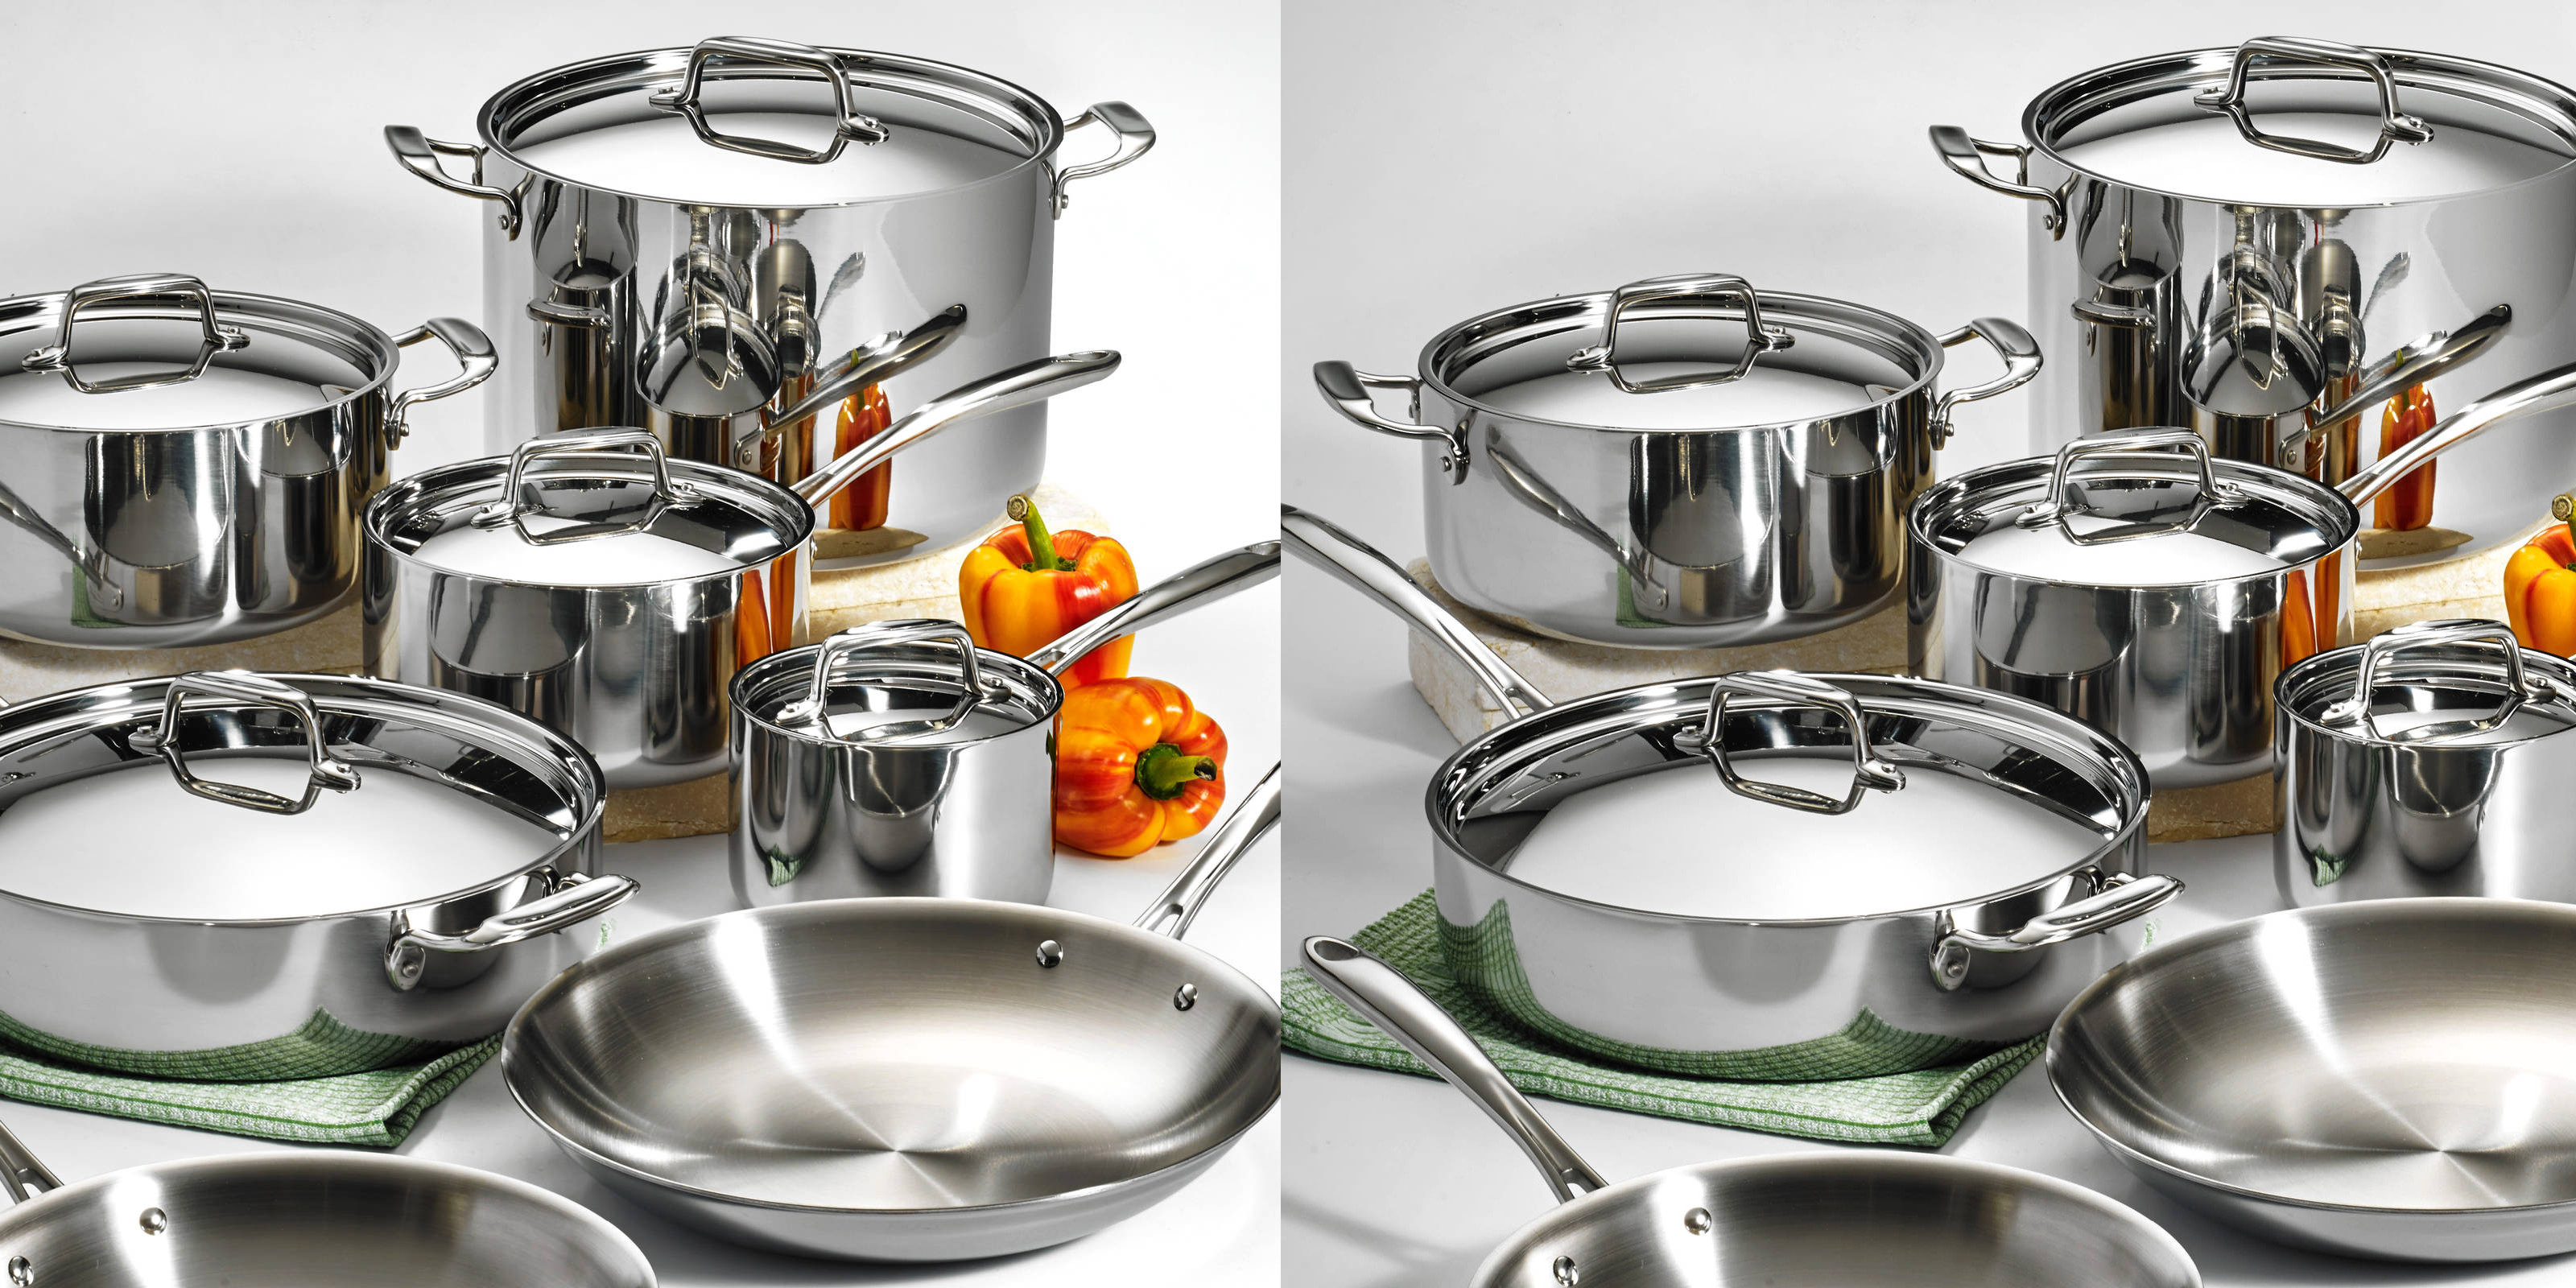  Tramontina Cookware Set Tri-Ply Clad Stainless Steel